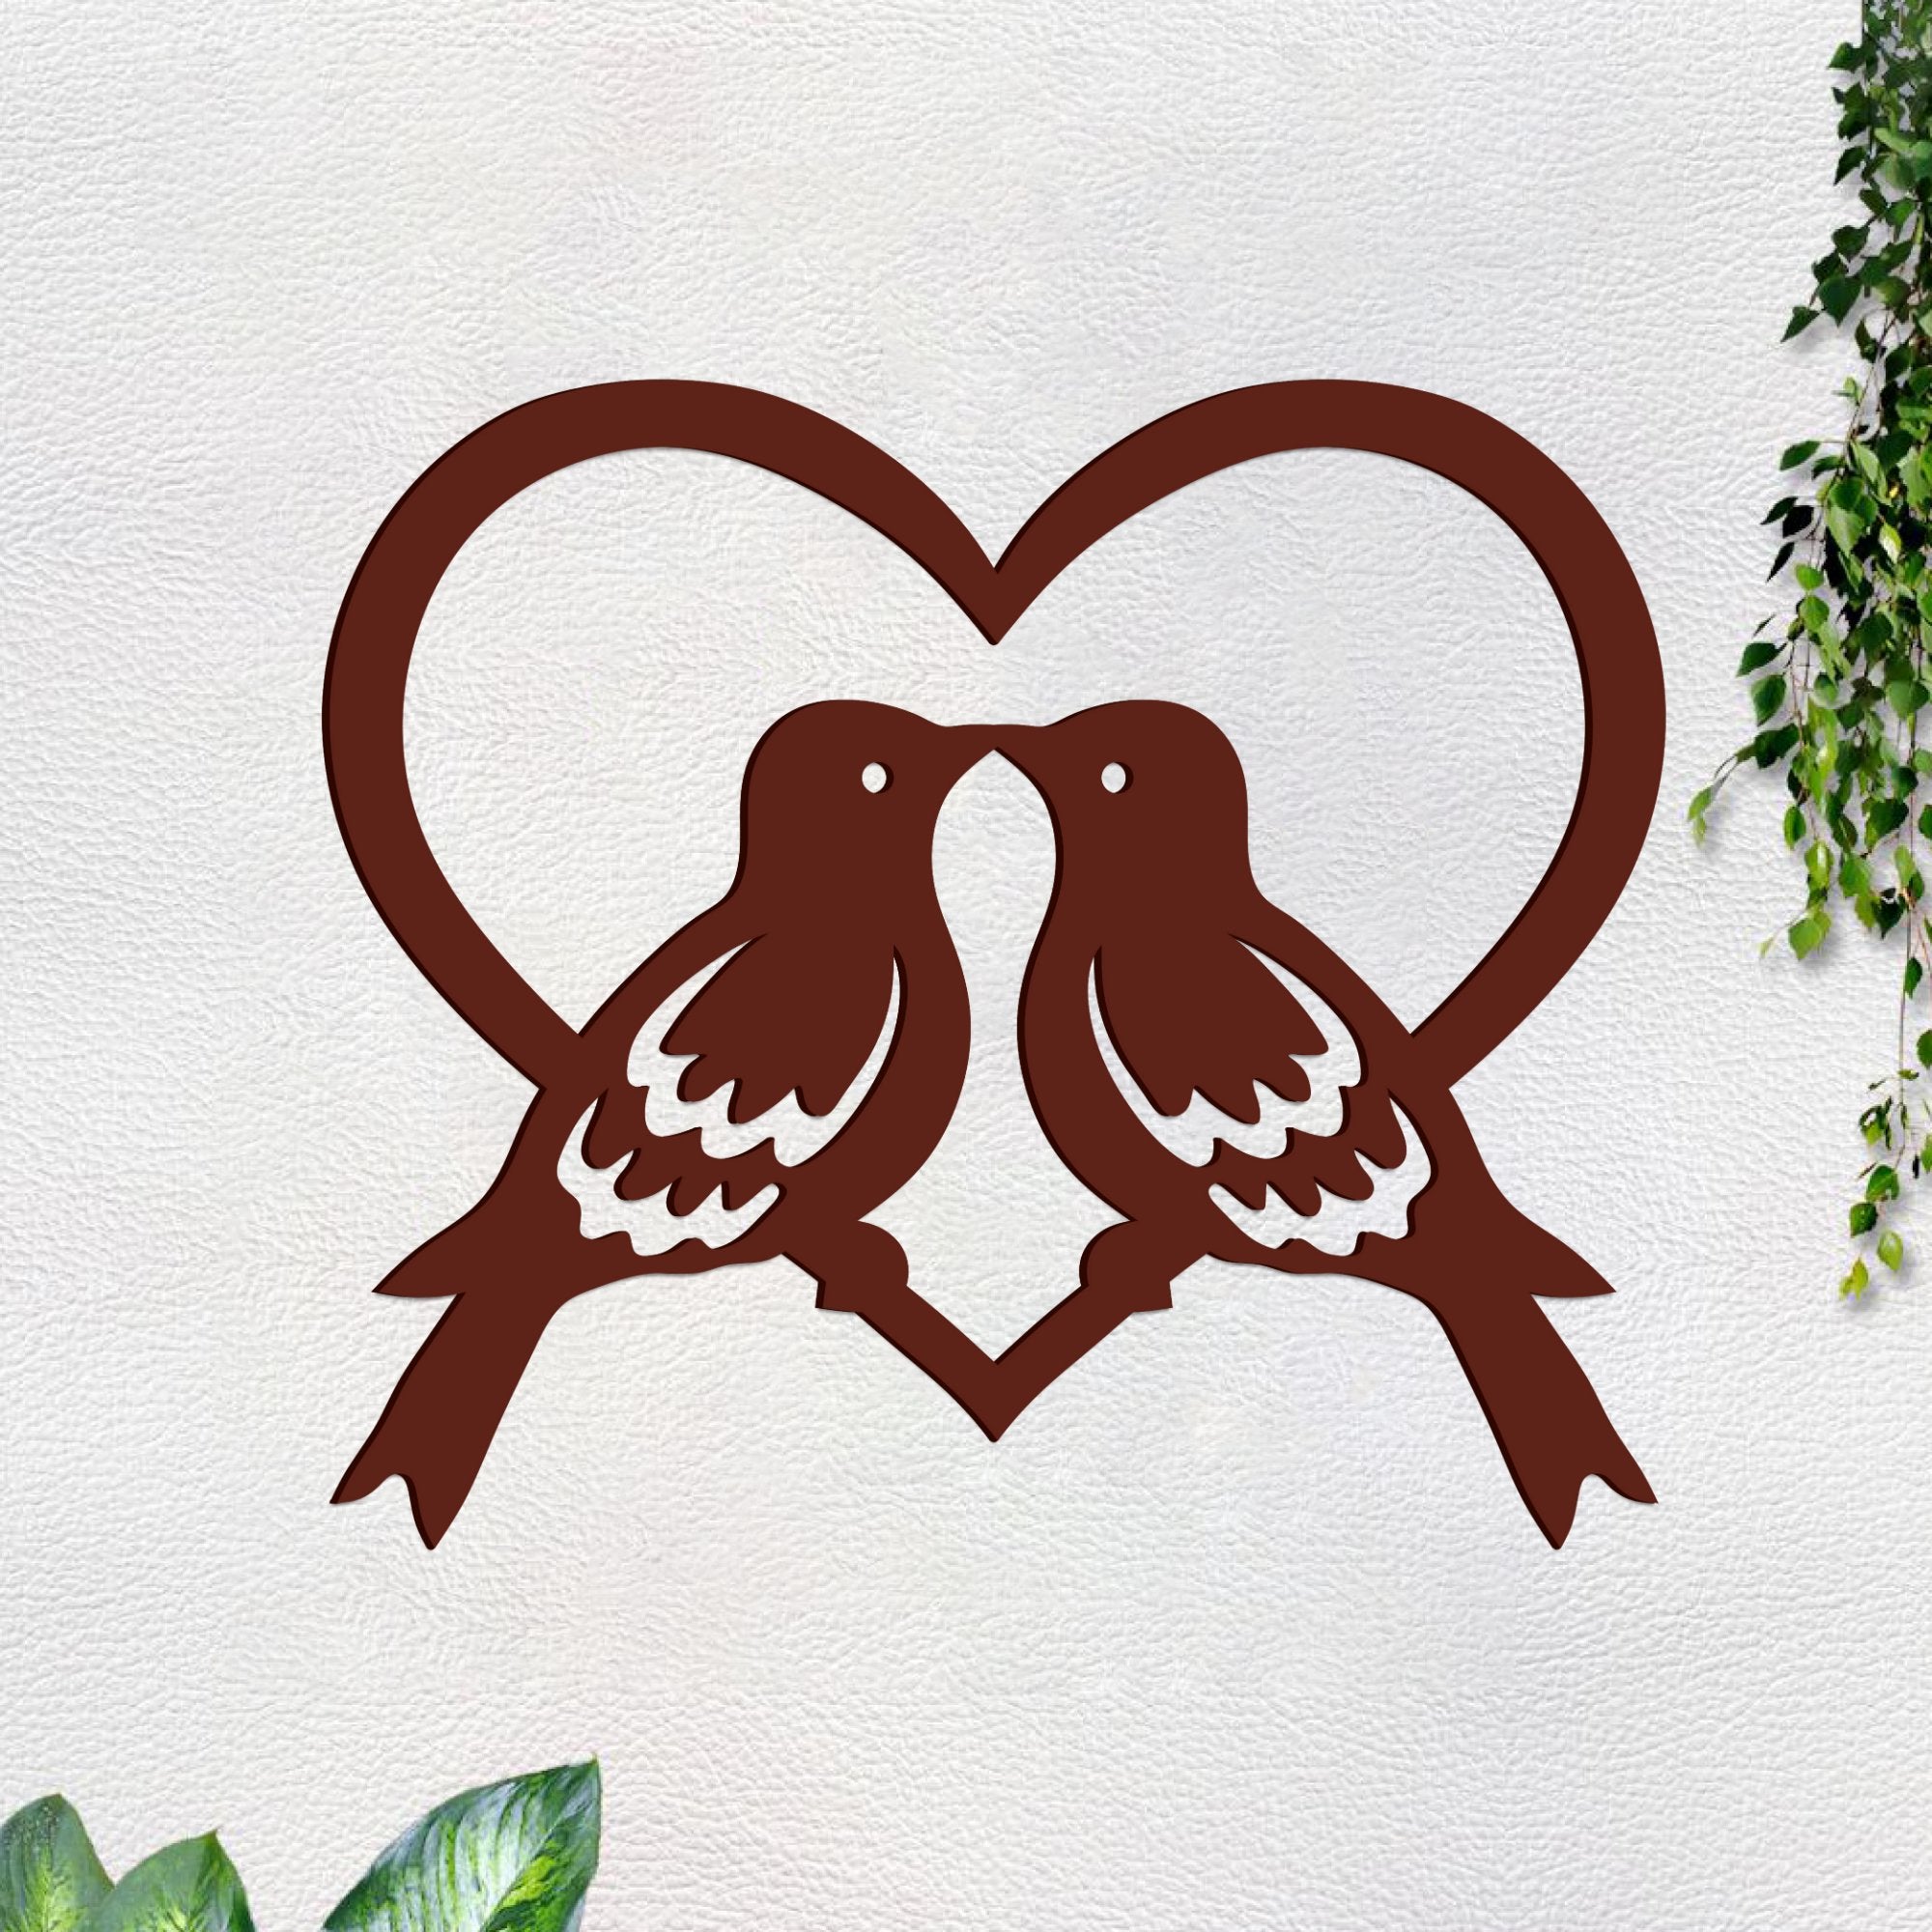 Two Birds in Heart Design Premium Quality Wooden Wall Hanging